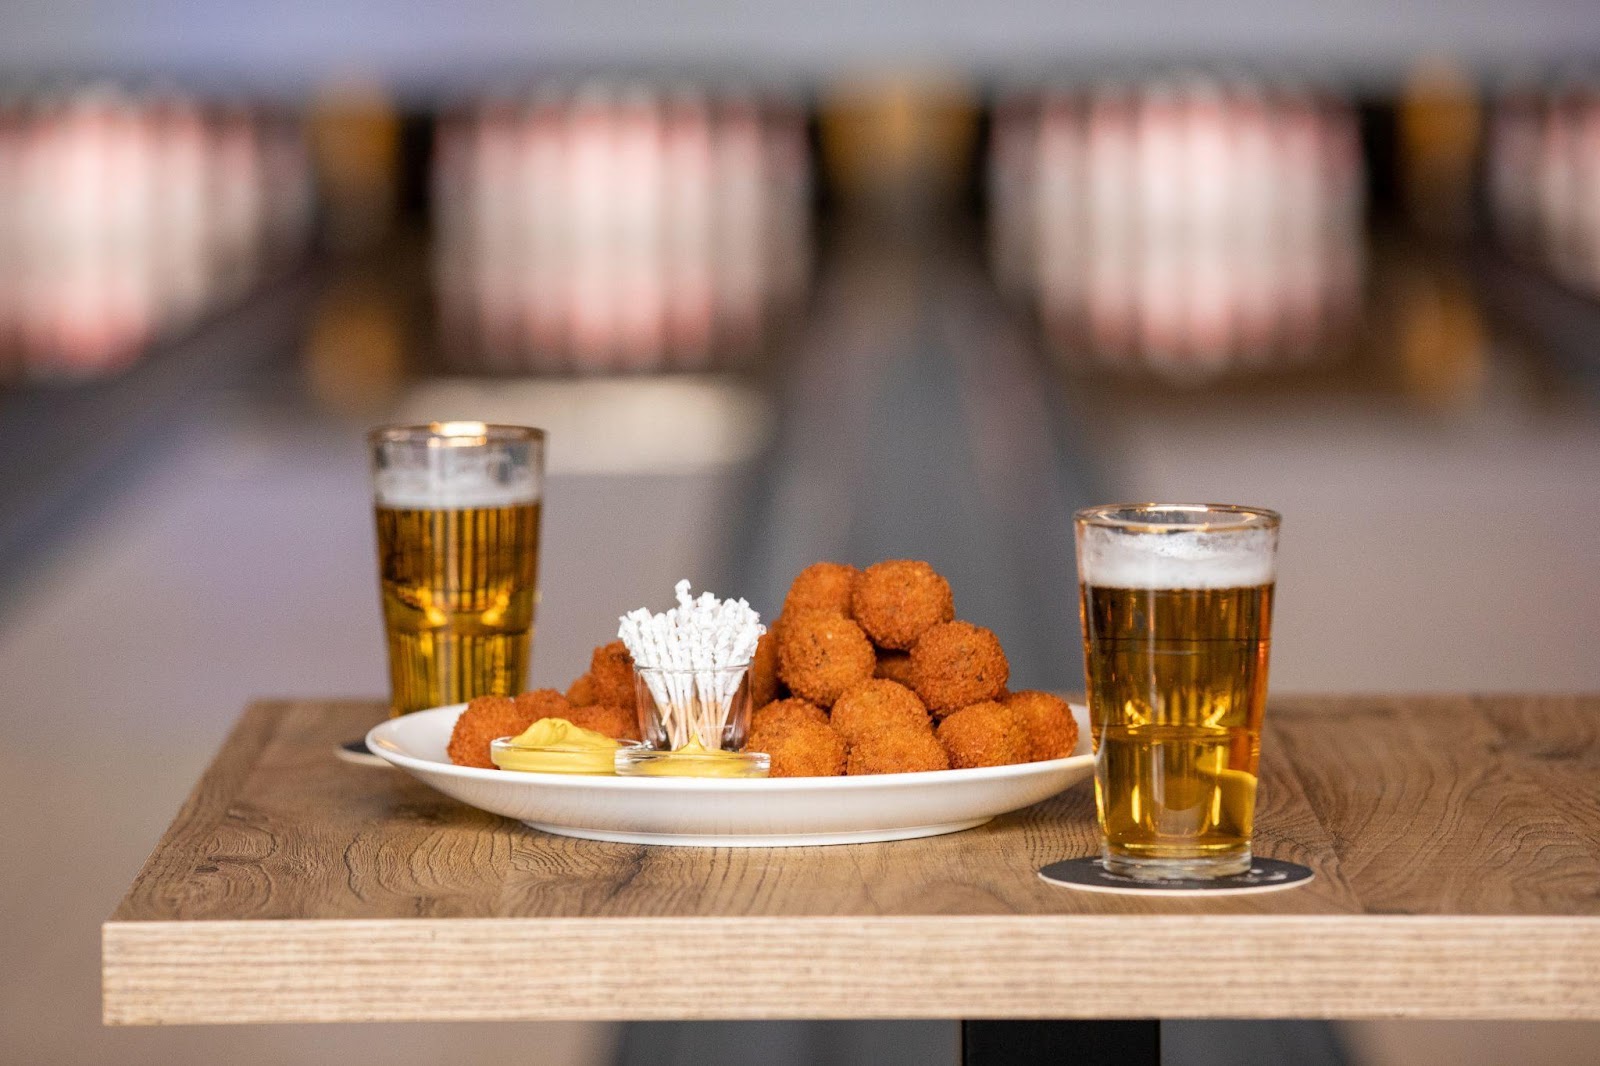 Fried chicken and beer on a bowling lane